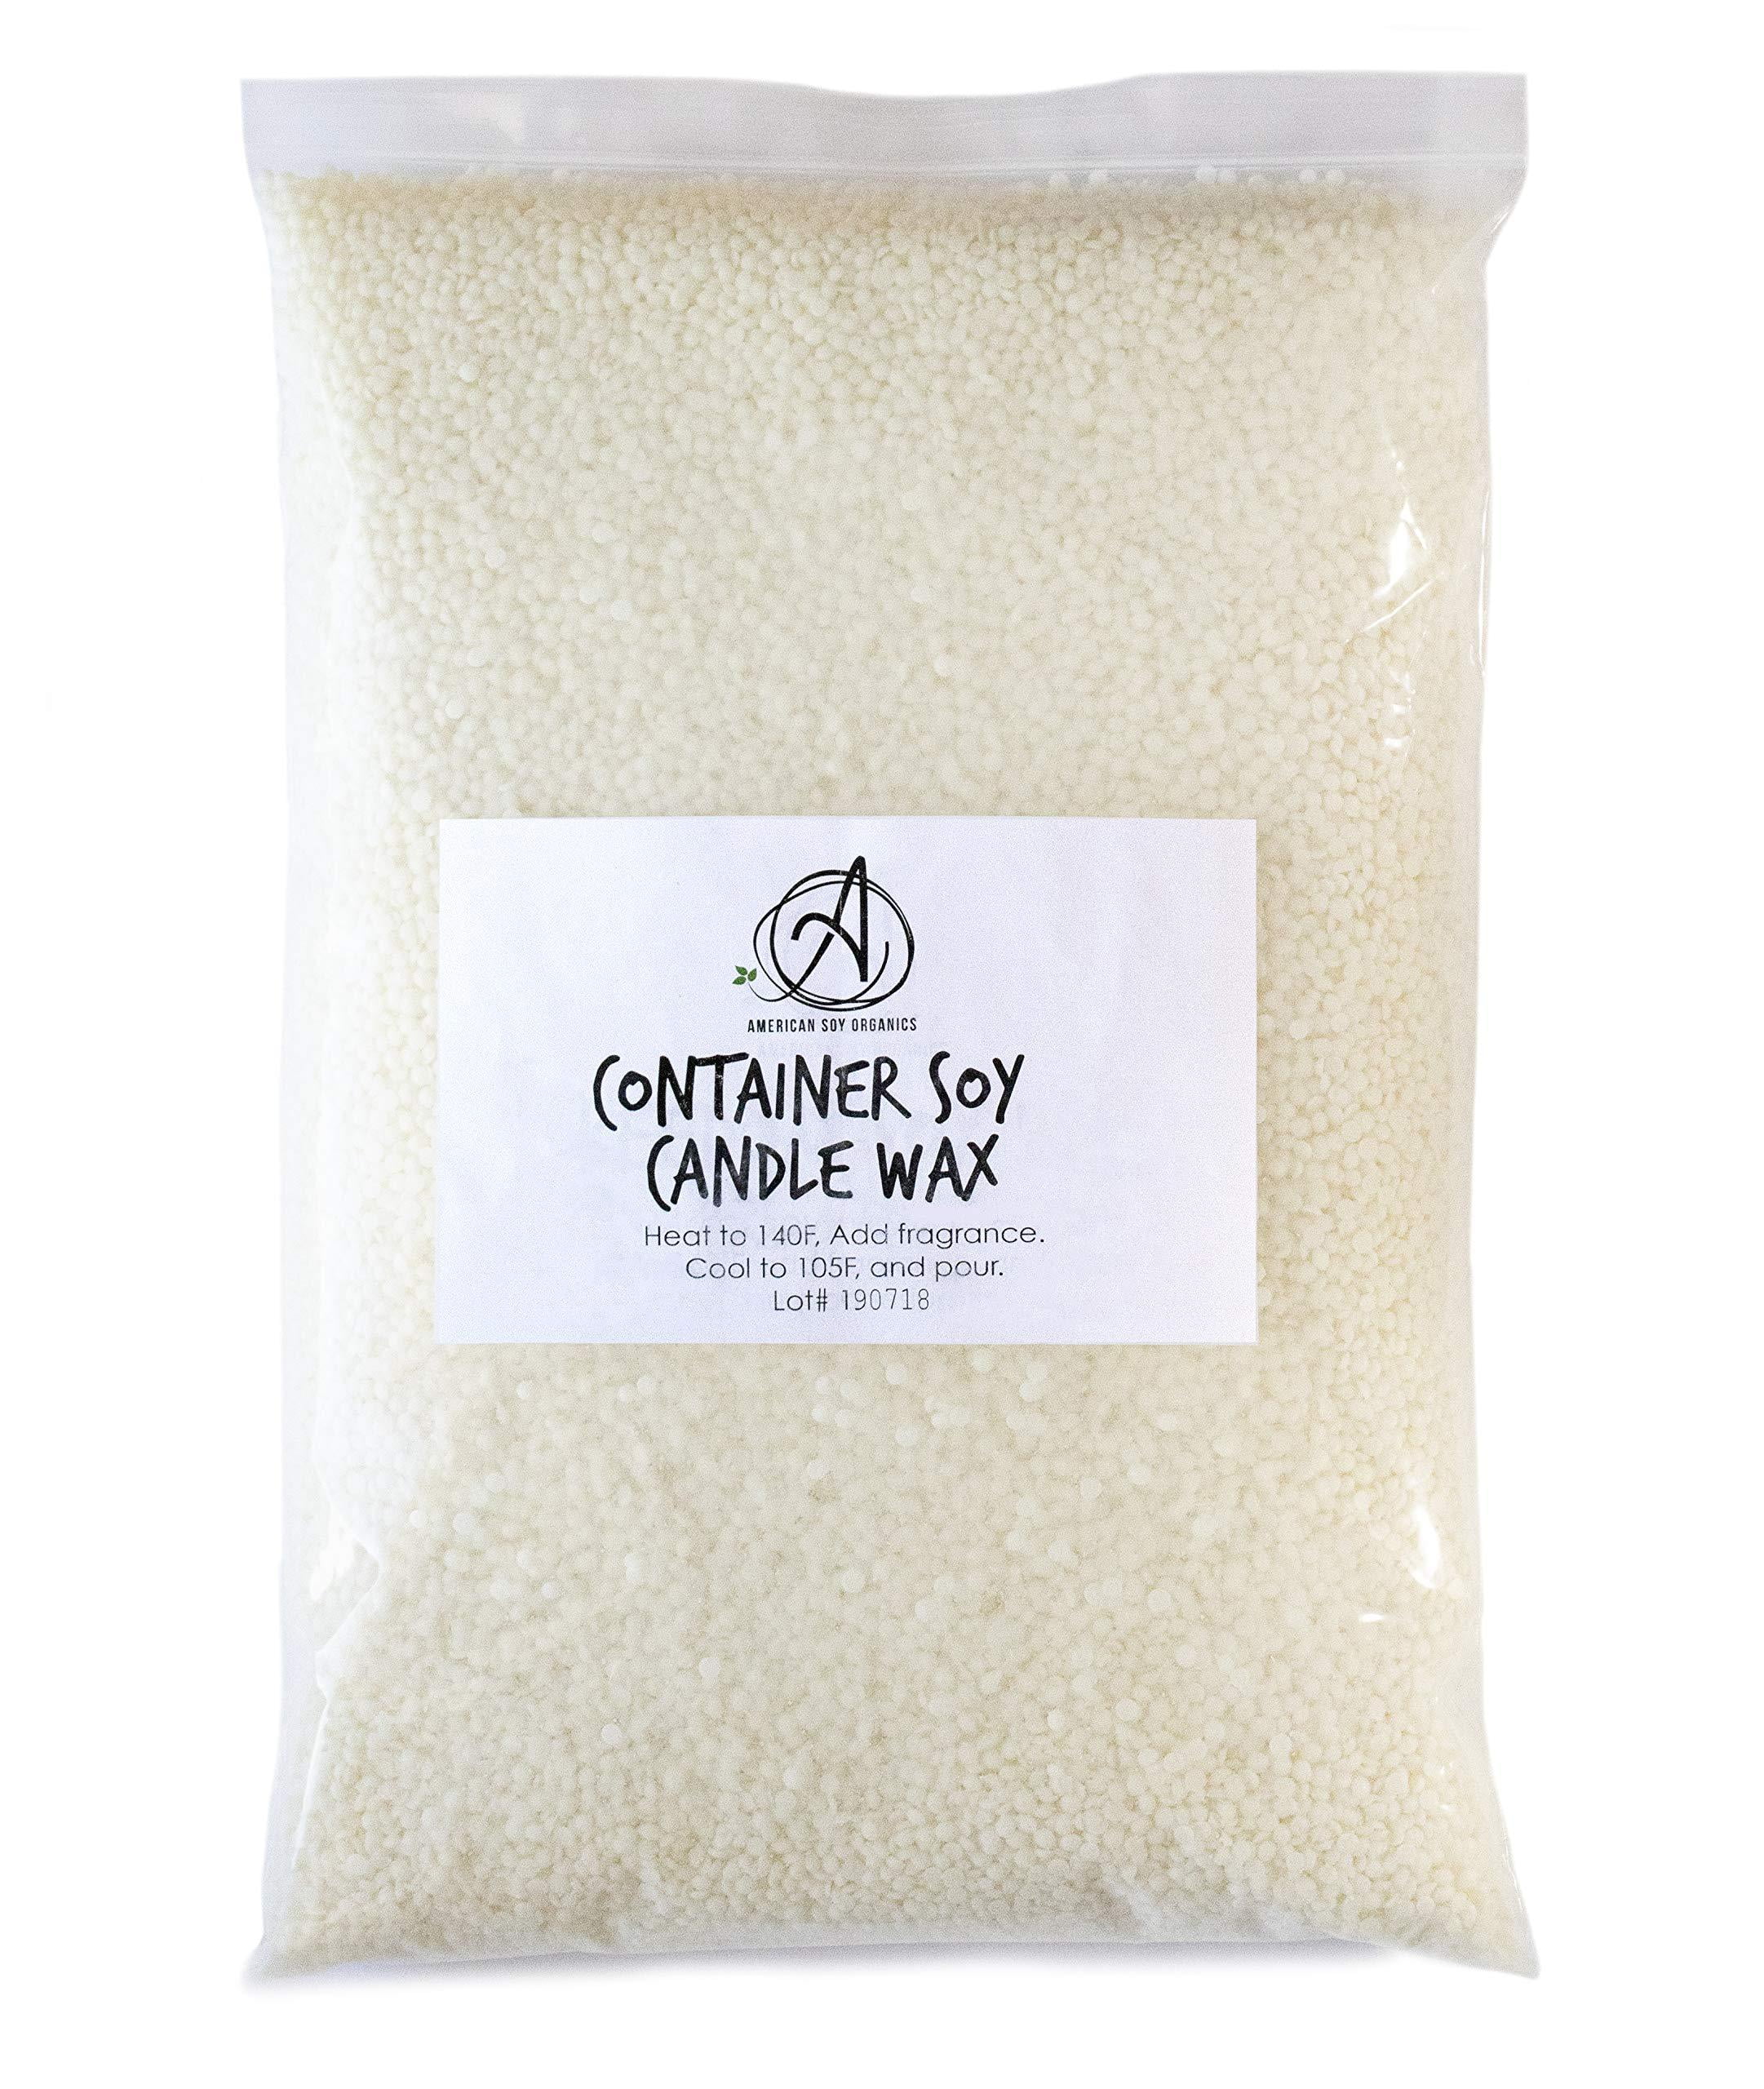 American Soy Organics Midwest Container Soy Wax: 10 lb Bag of